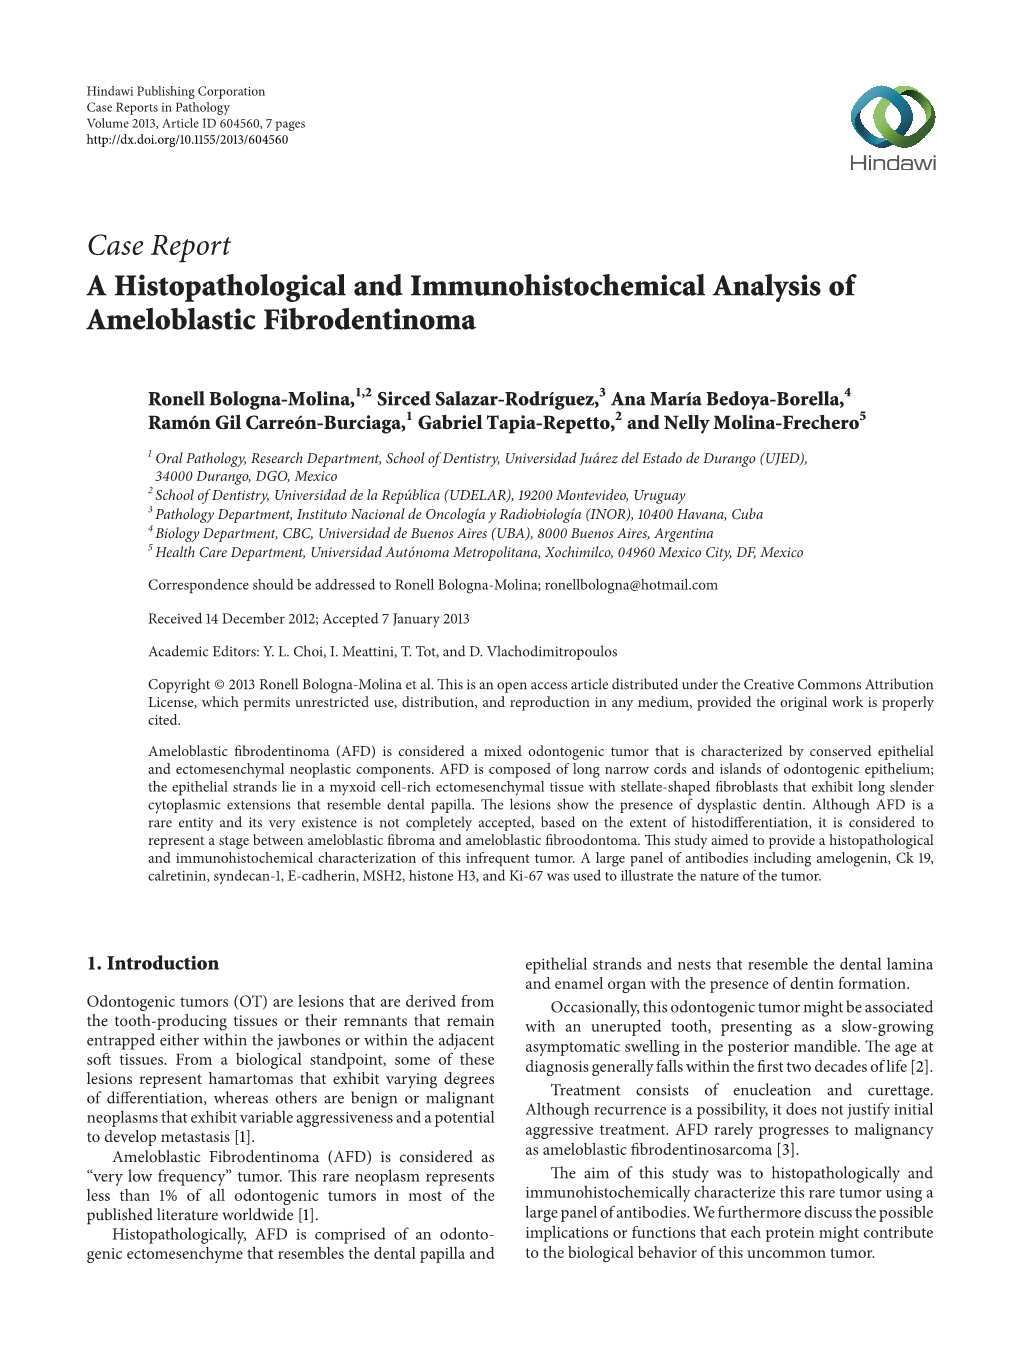 A Histopathological and Immunohistochemical Analysis of Ameloblastic Fibrodentinoma